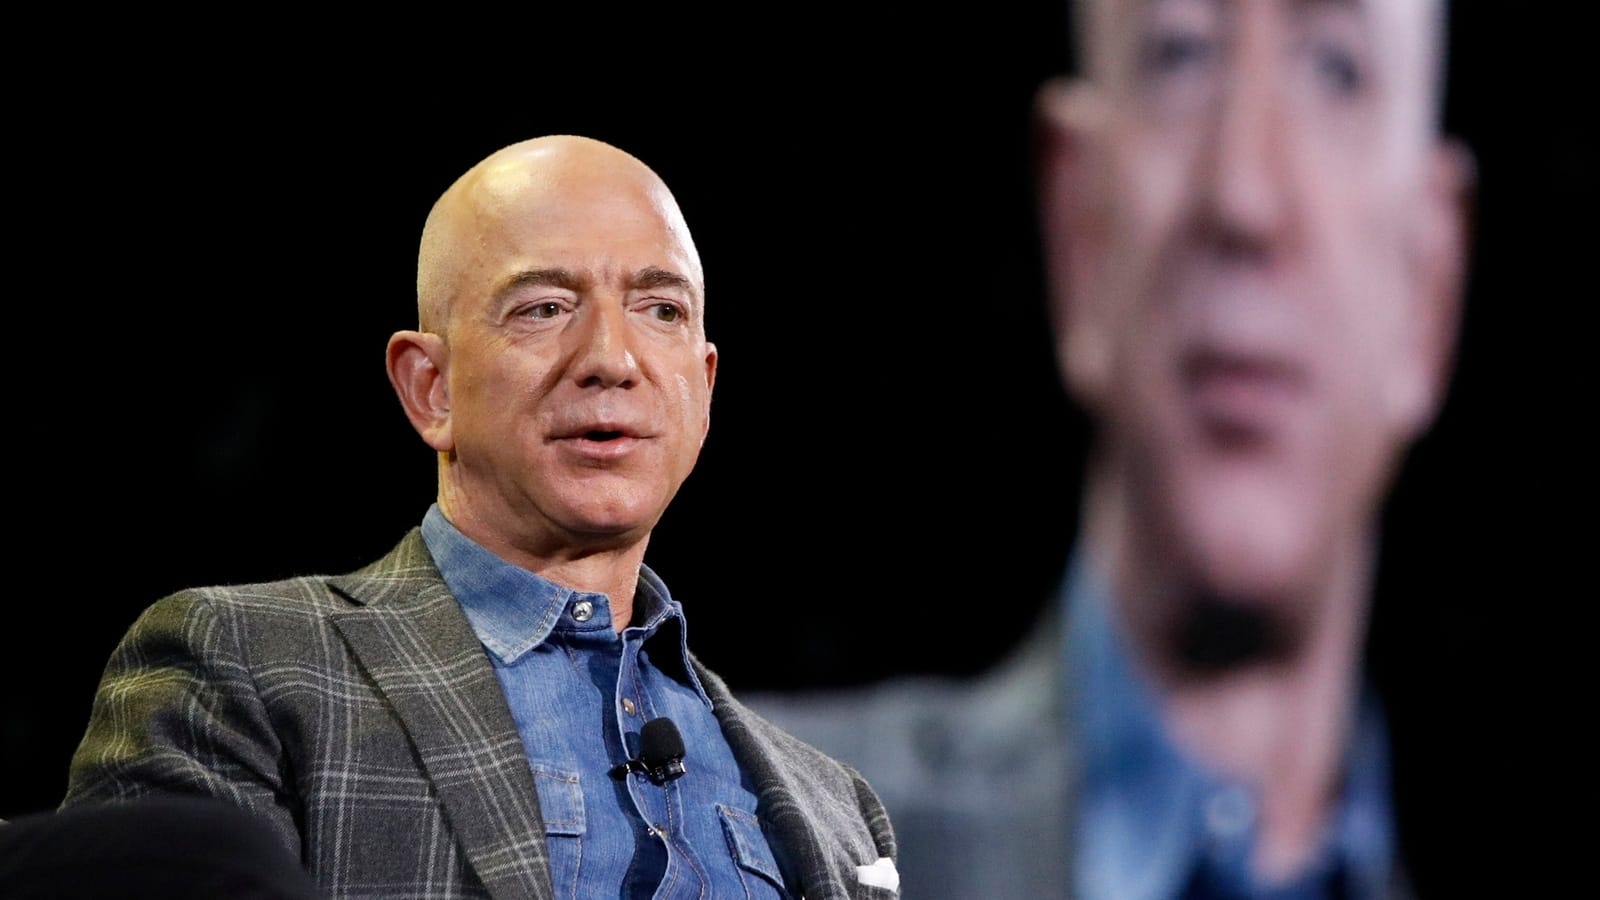 Amazon boss Jeff Bezos sets his first meeting at 10 am, reveals his morning routine: ‘I like to putter’